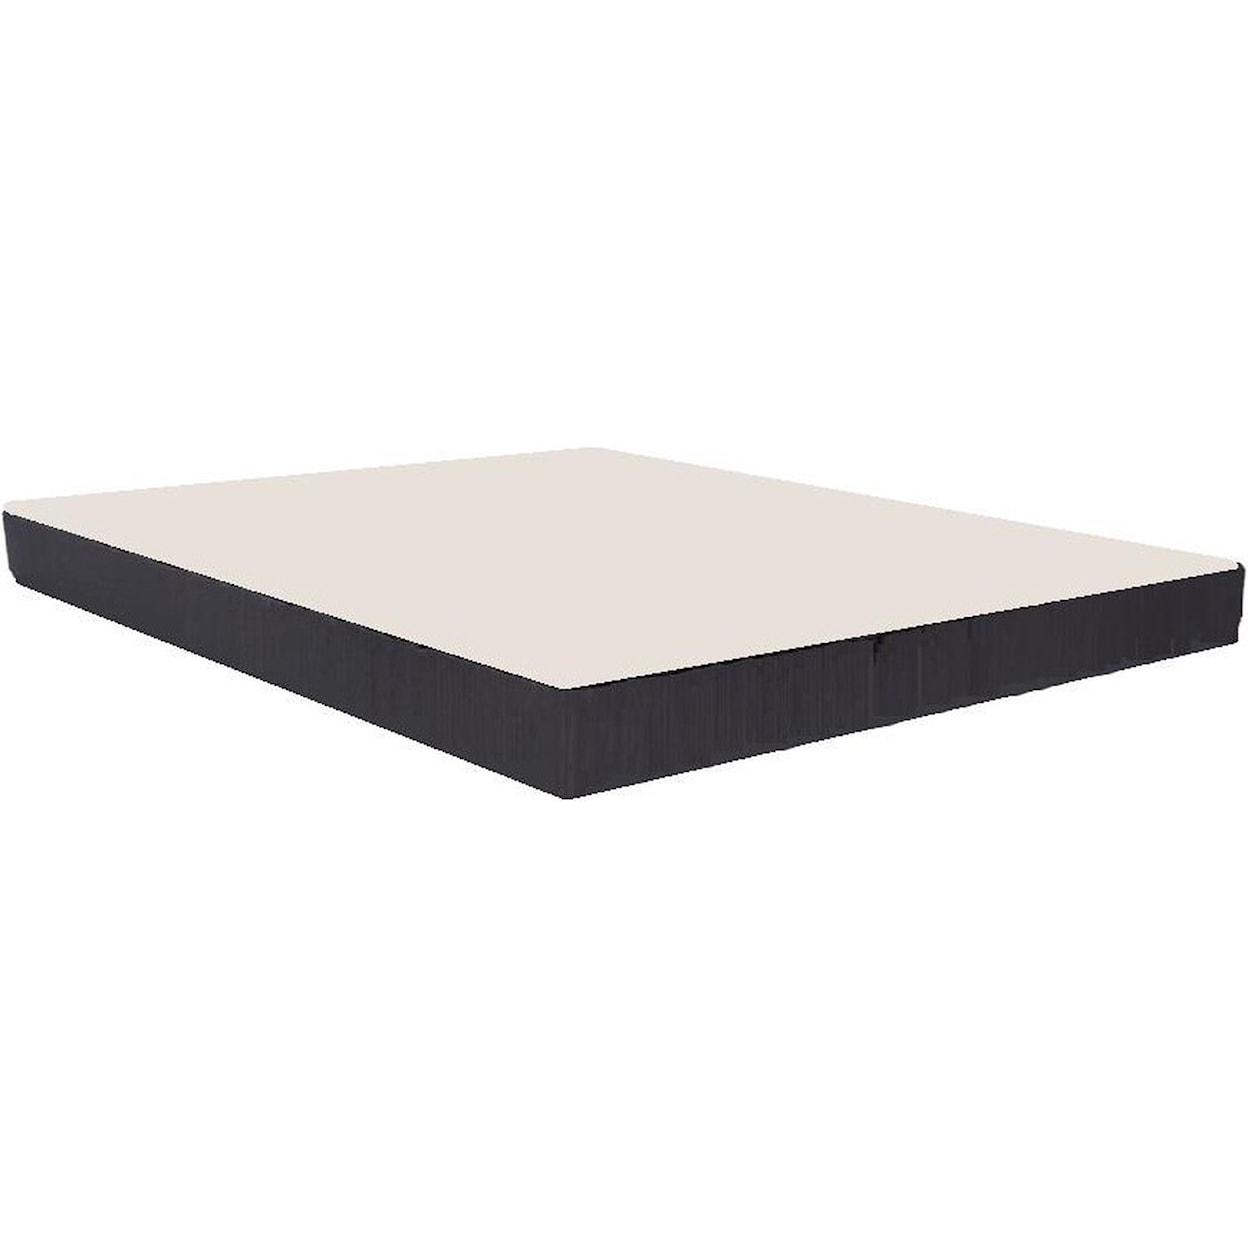 Southerland Bedding Co. Southerland Foundations Twin Low Profile Base 5" Height